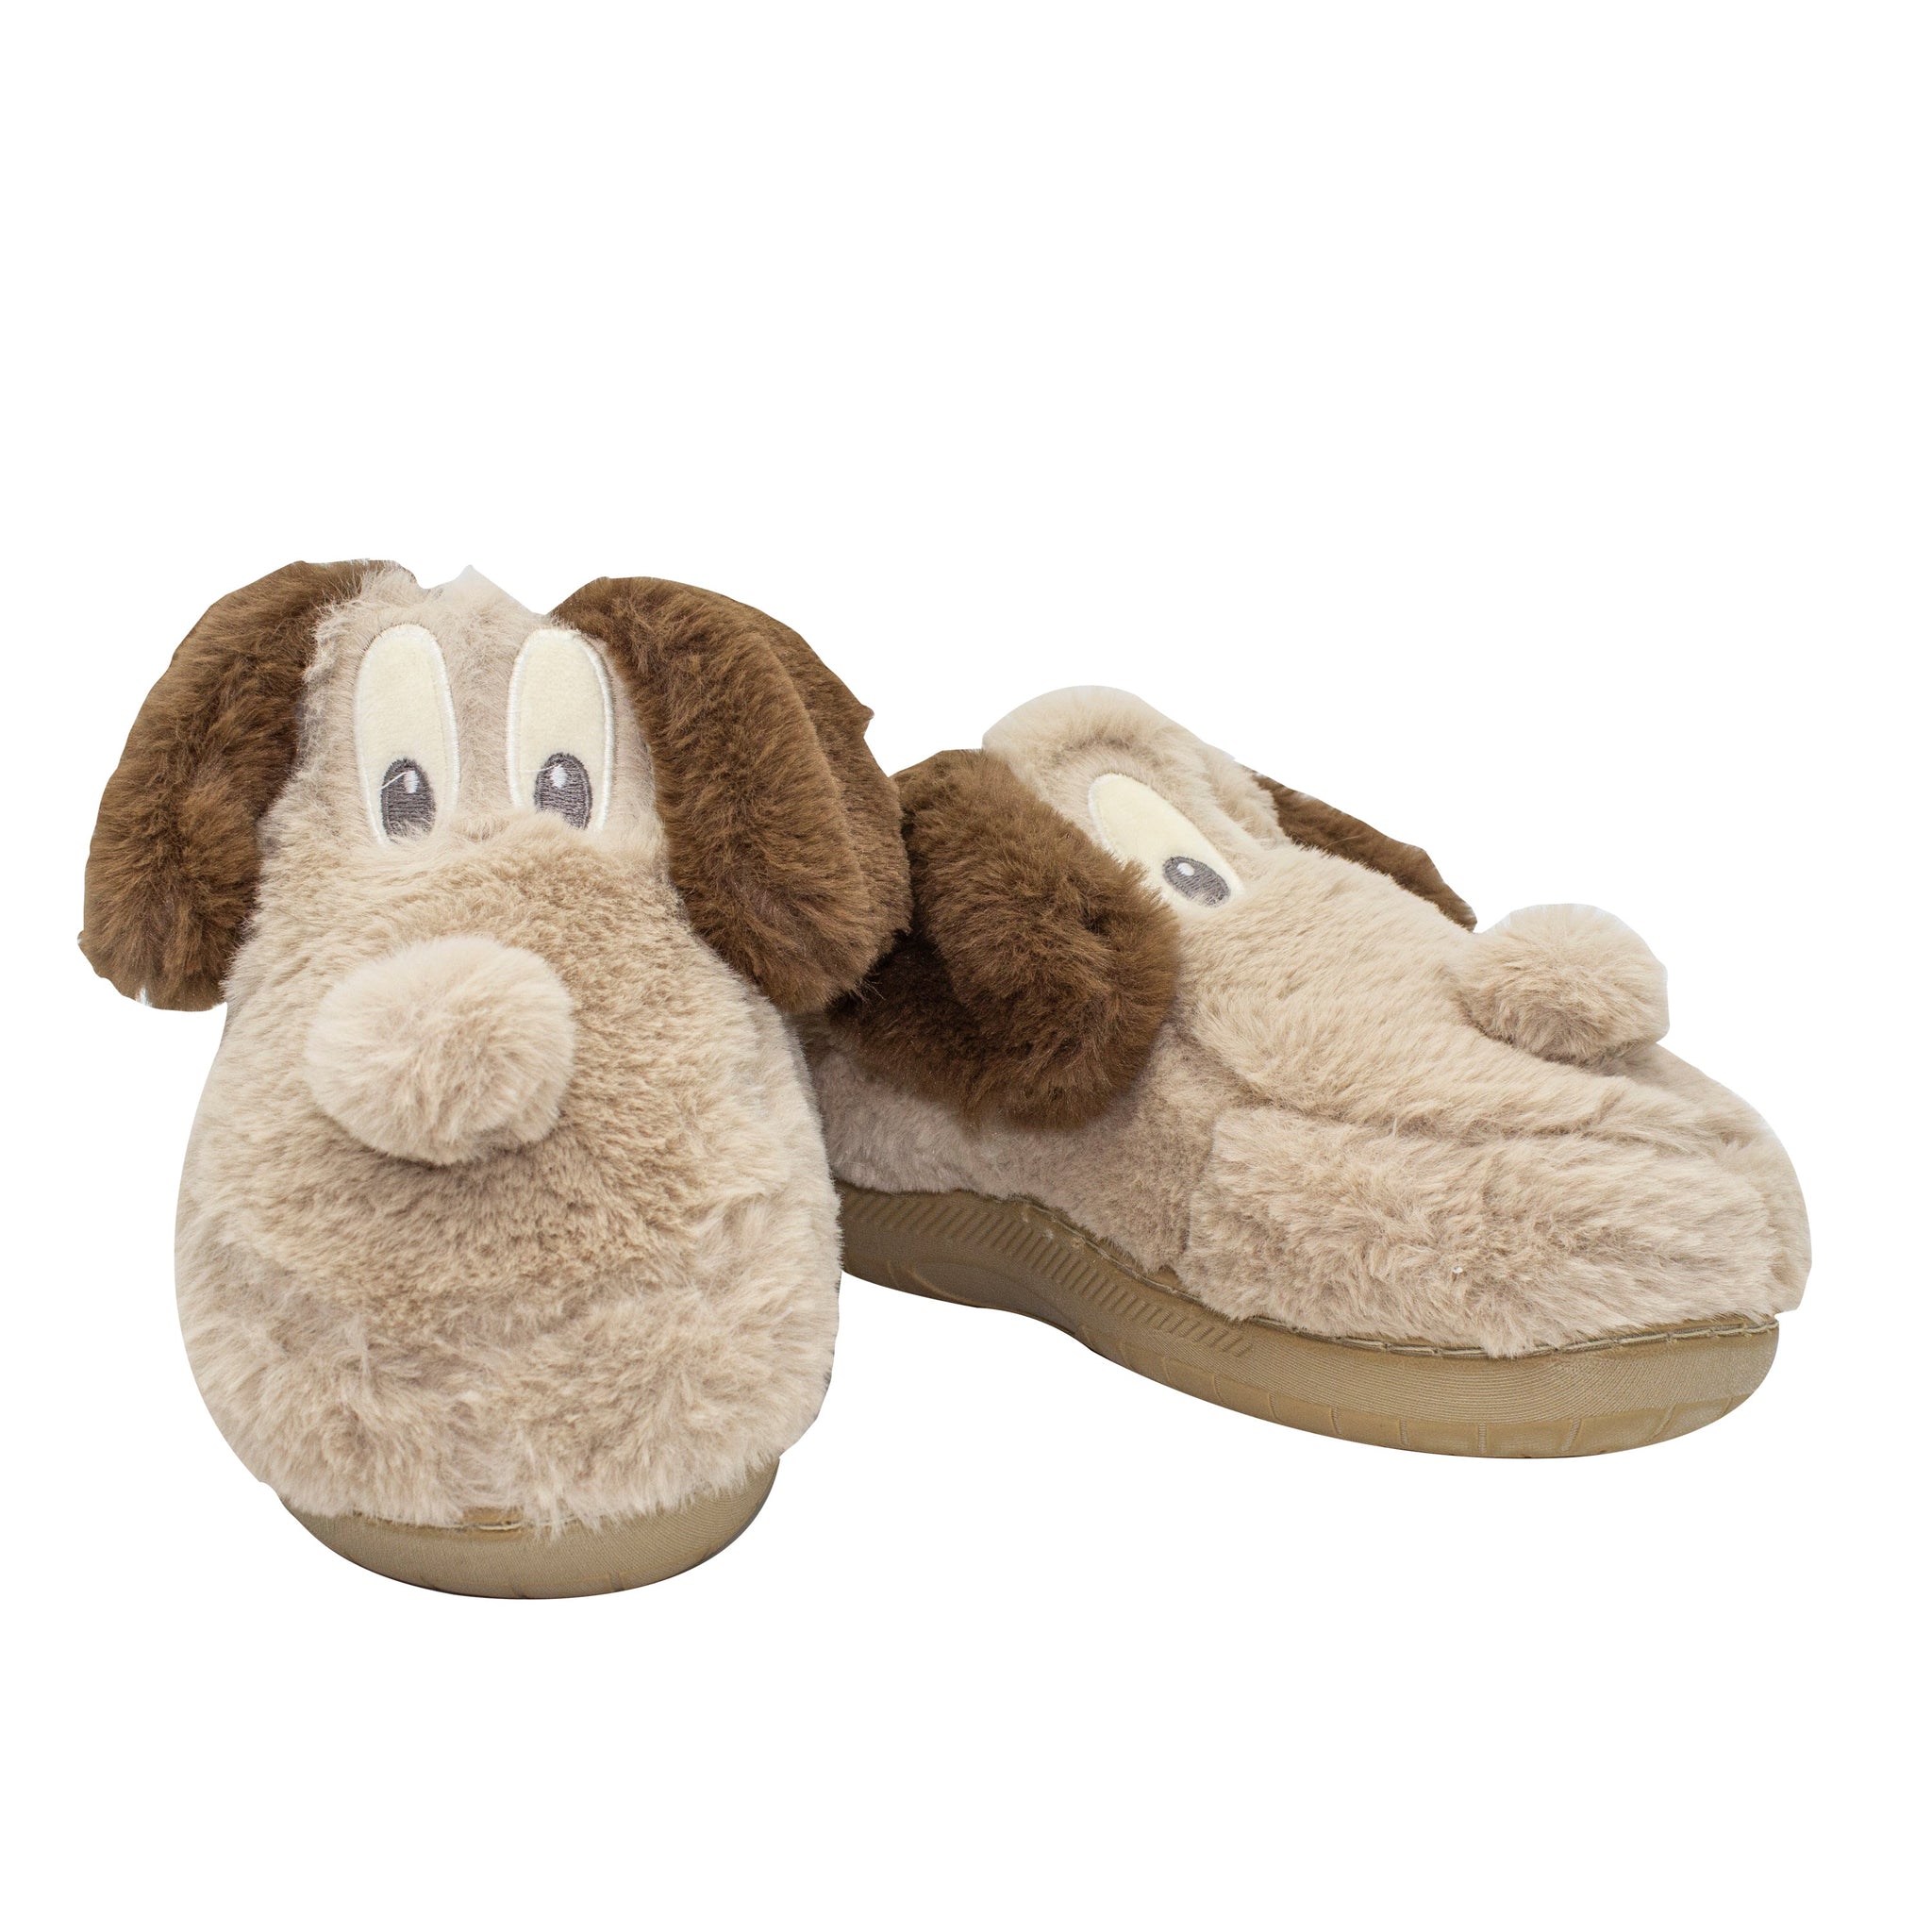 Cute and Comfy Animal Indoor and Outdoor Slippers